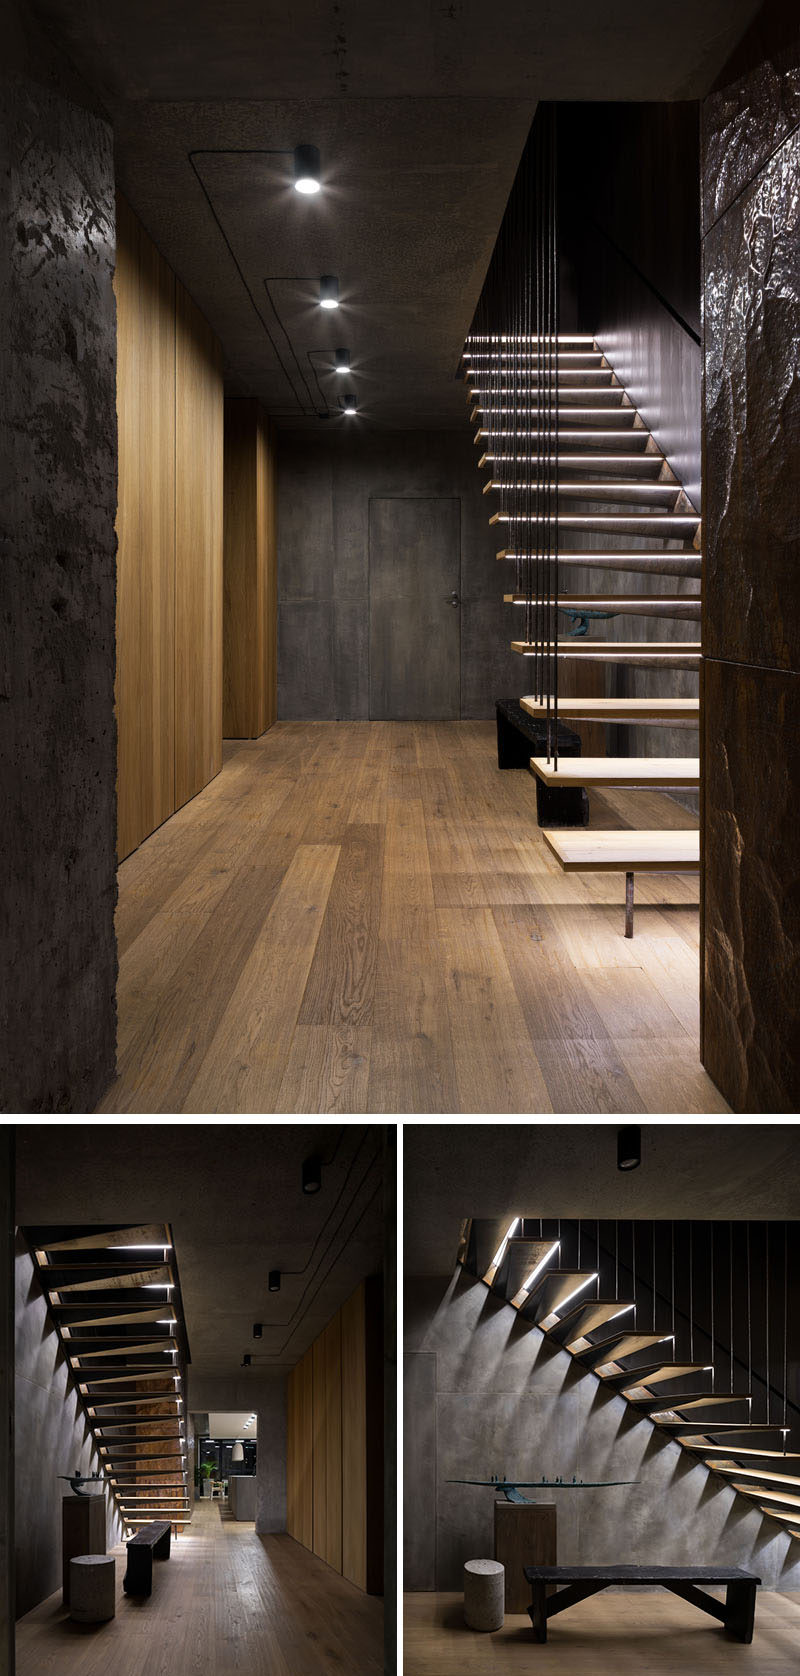 The front hallway in this modern apartment is a mix of concrete and wood which ties into the rest of the home. The hallway is simplistically lit, and each wooden step of the wood and steel staircase leading upstairs is individually lit.